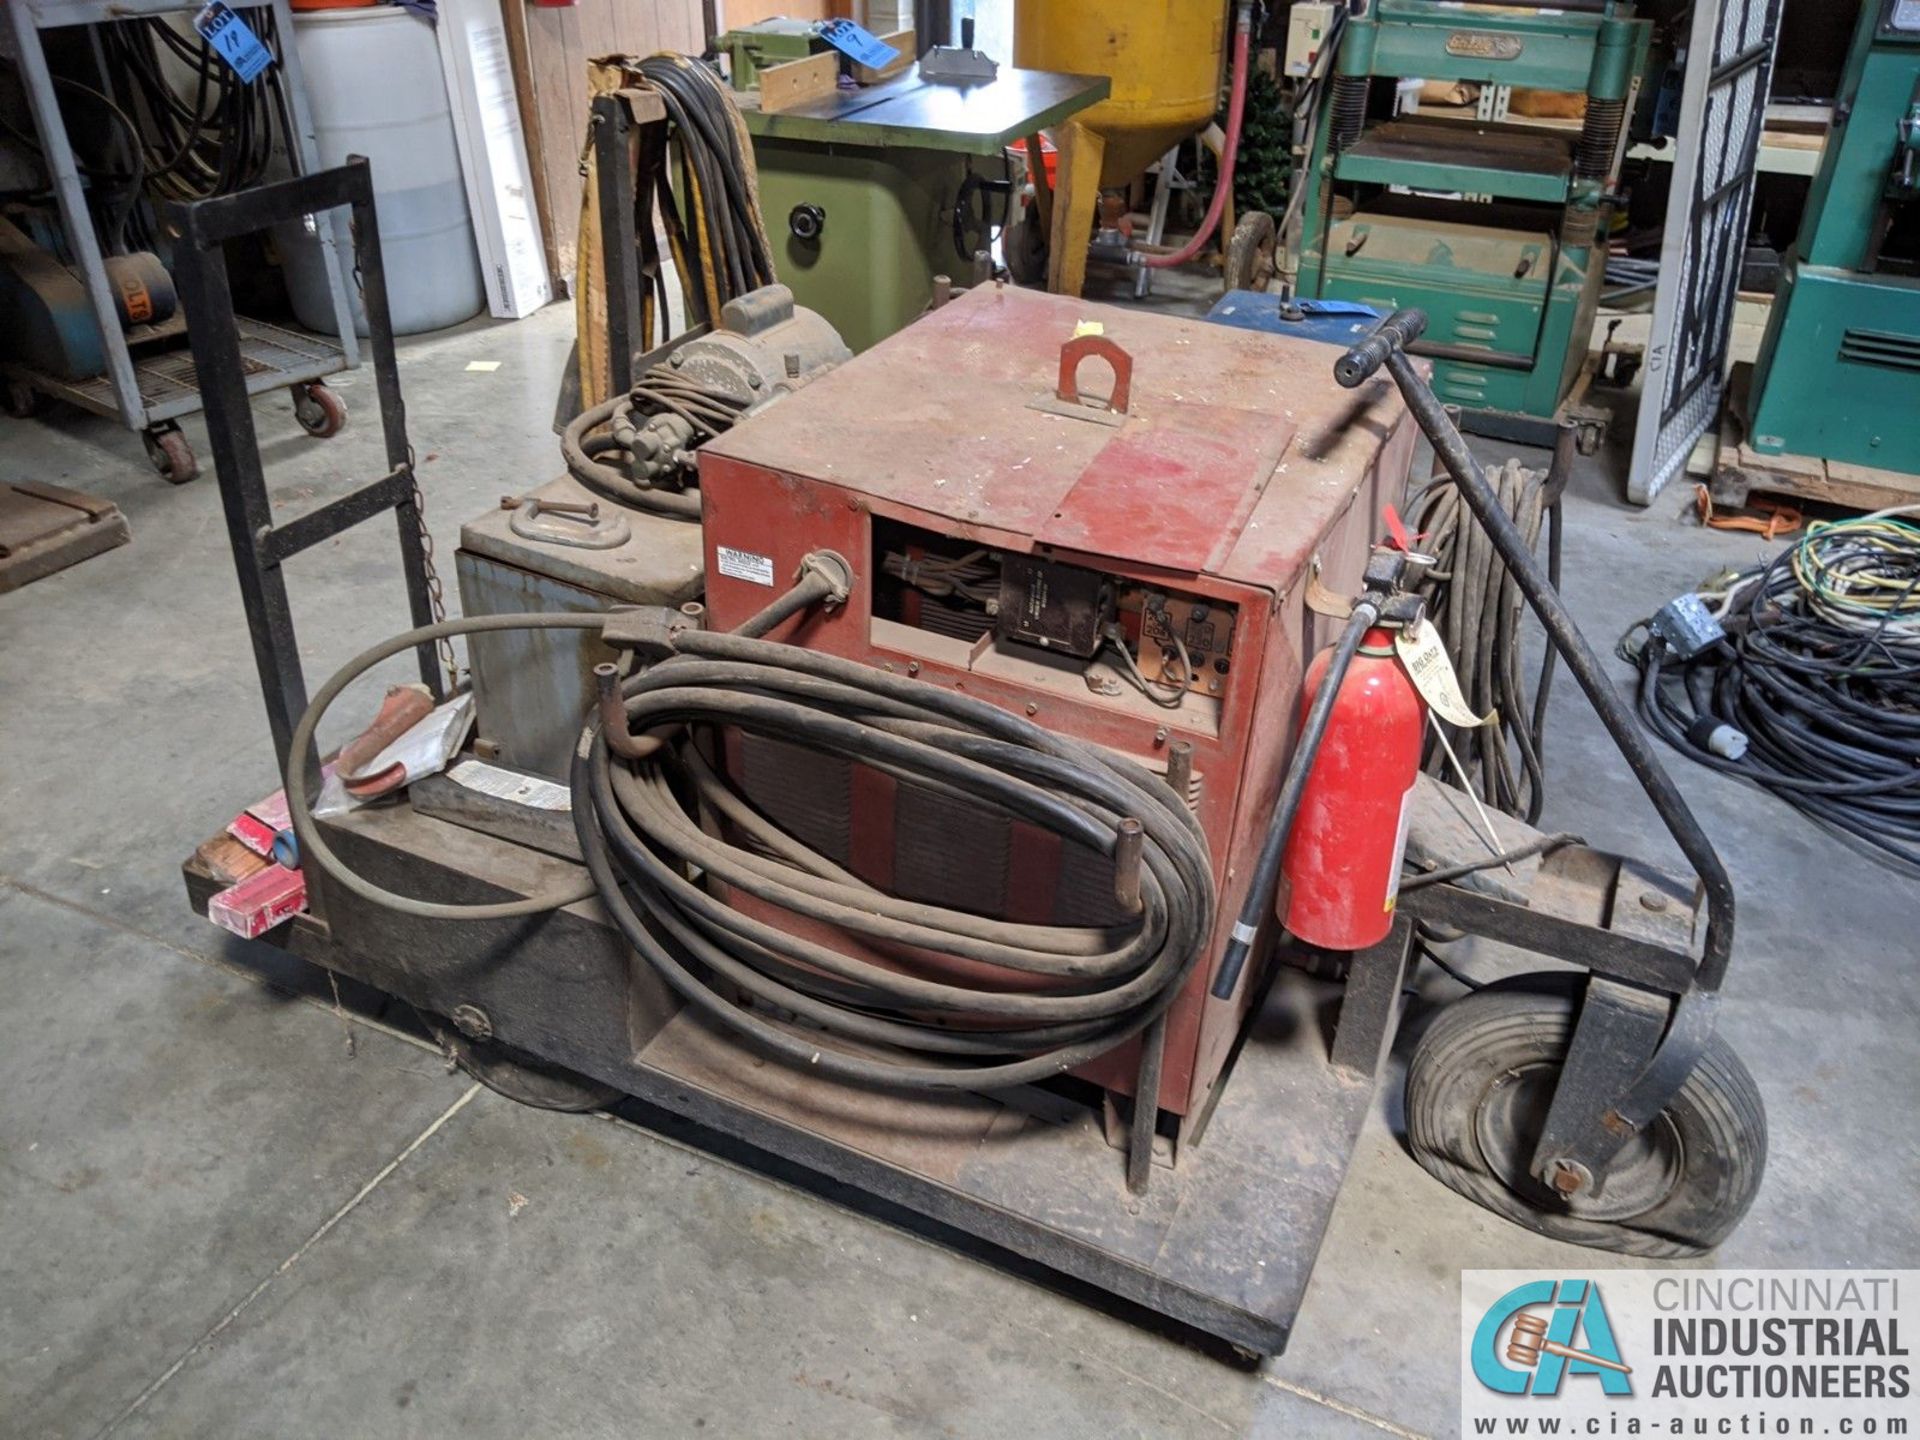 250 AMP LINCOLN MODEL TIG 250/250 WELDER; S/N 533770, MOUNTED ON CART W/ LEADS & AIRCO CHILLER (8635 - Image 2 of 5